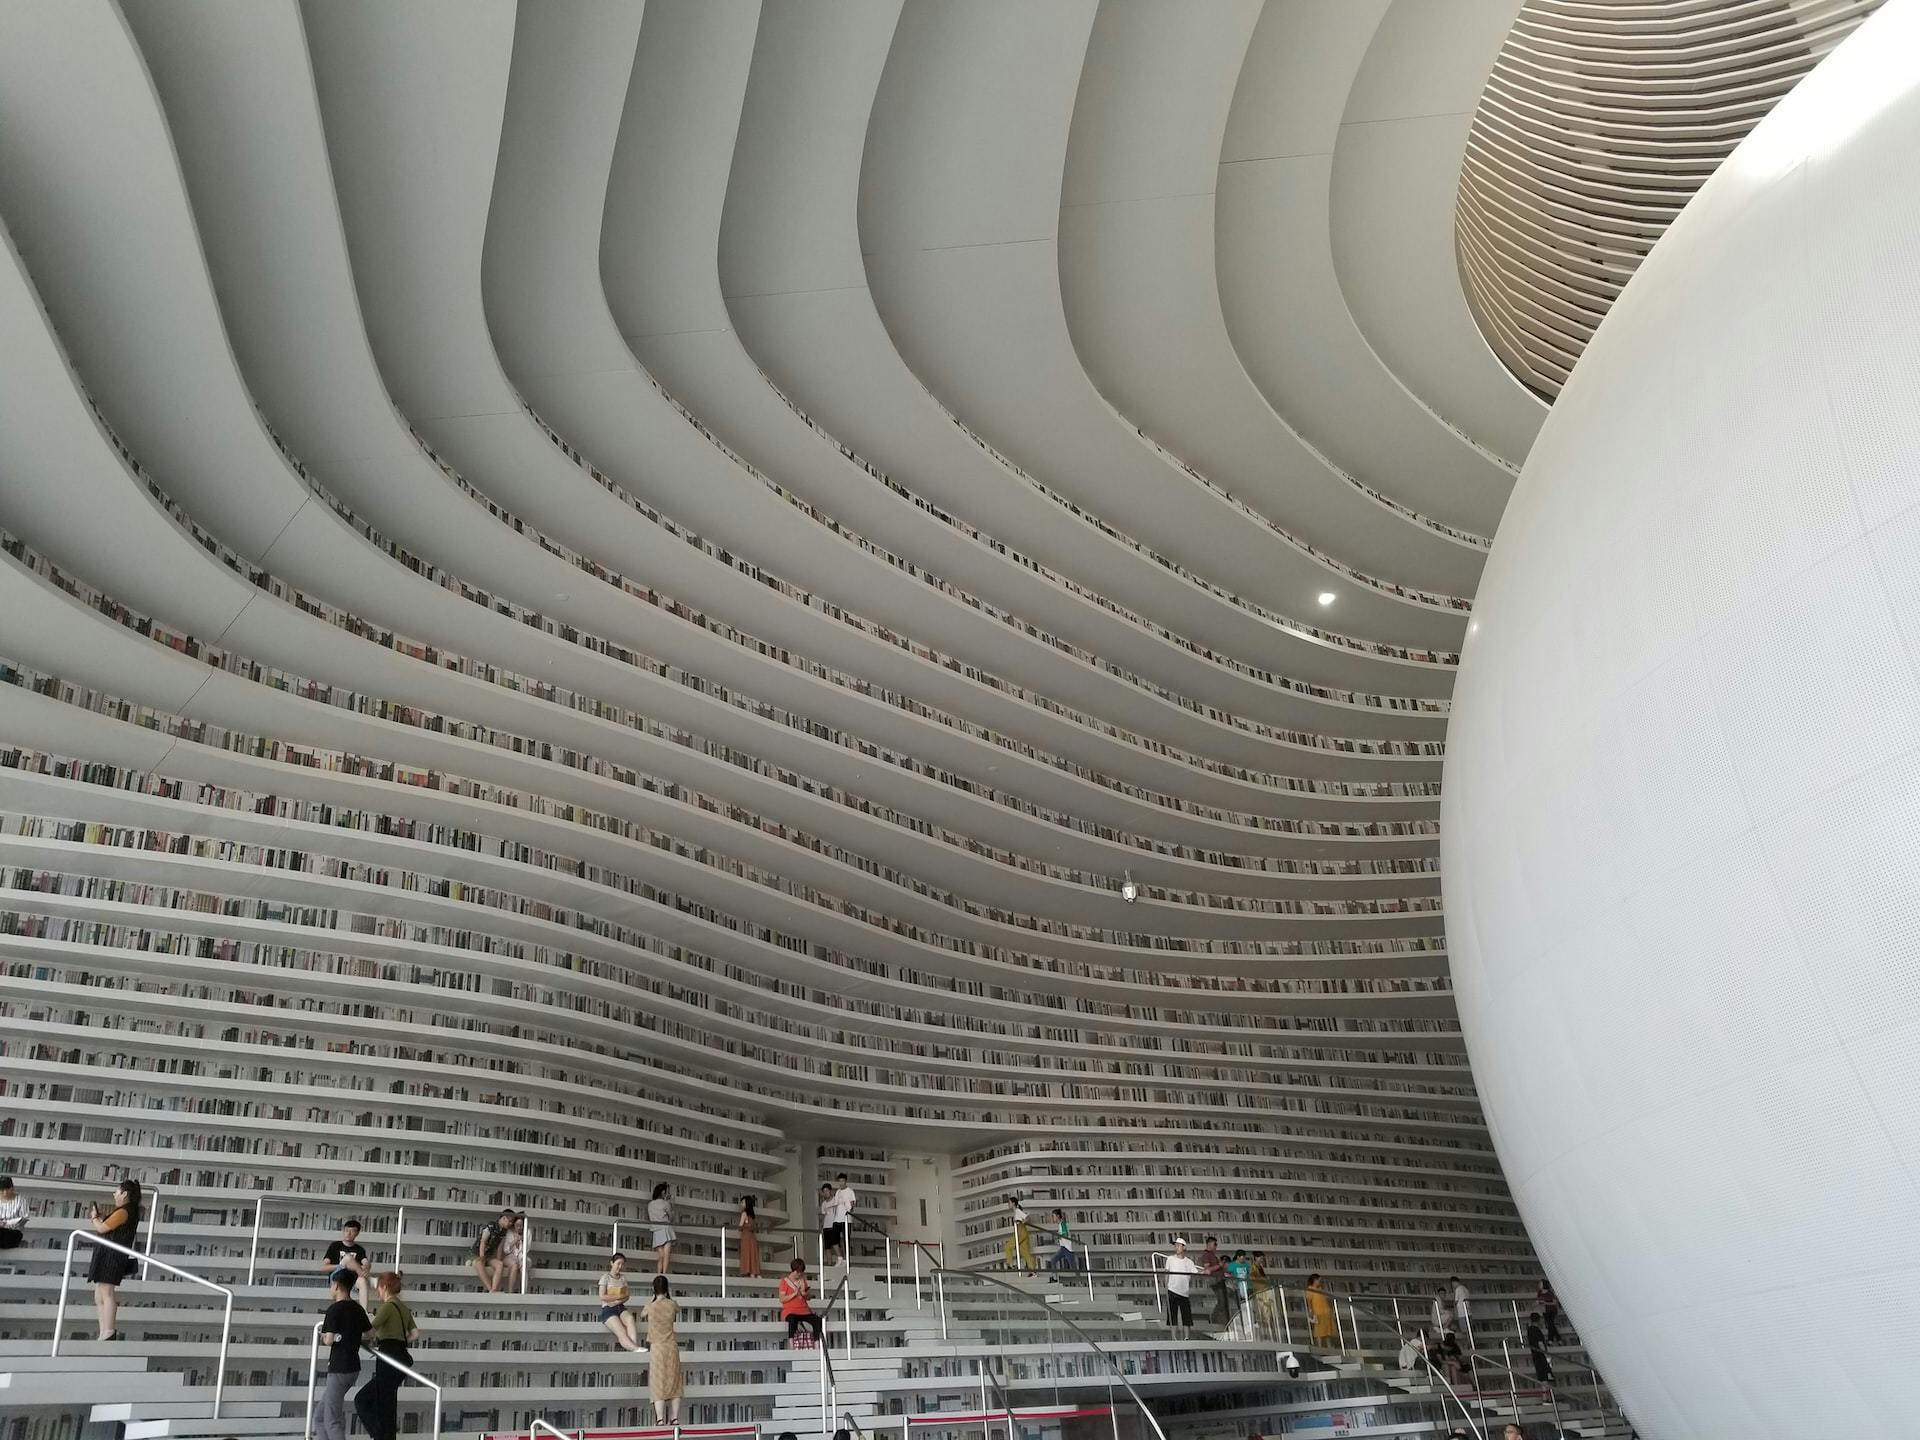 Binhai Library, where patrons stand on some steps while white curved shelves of books extend far above